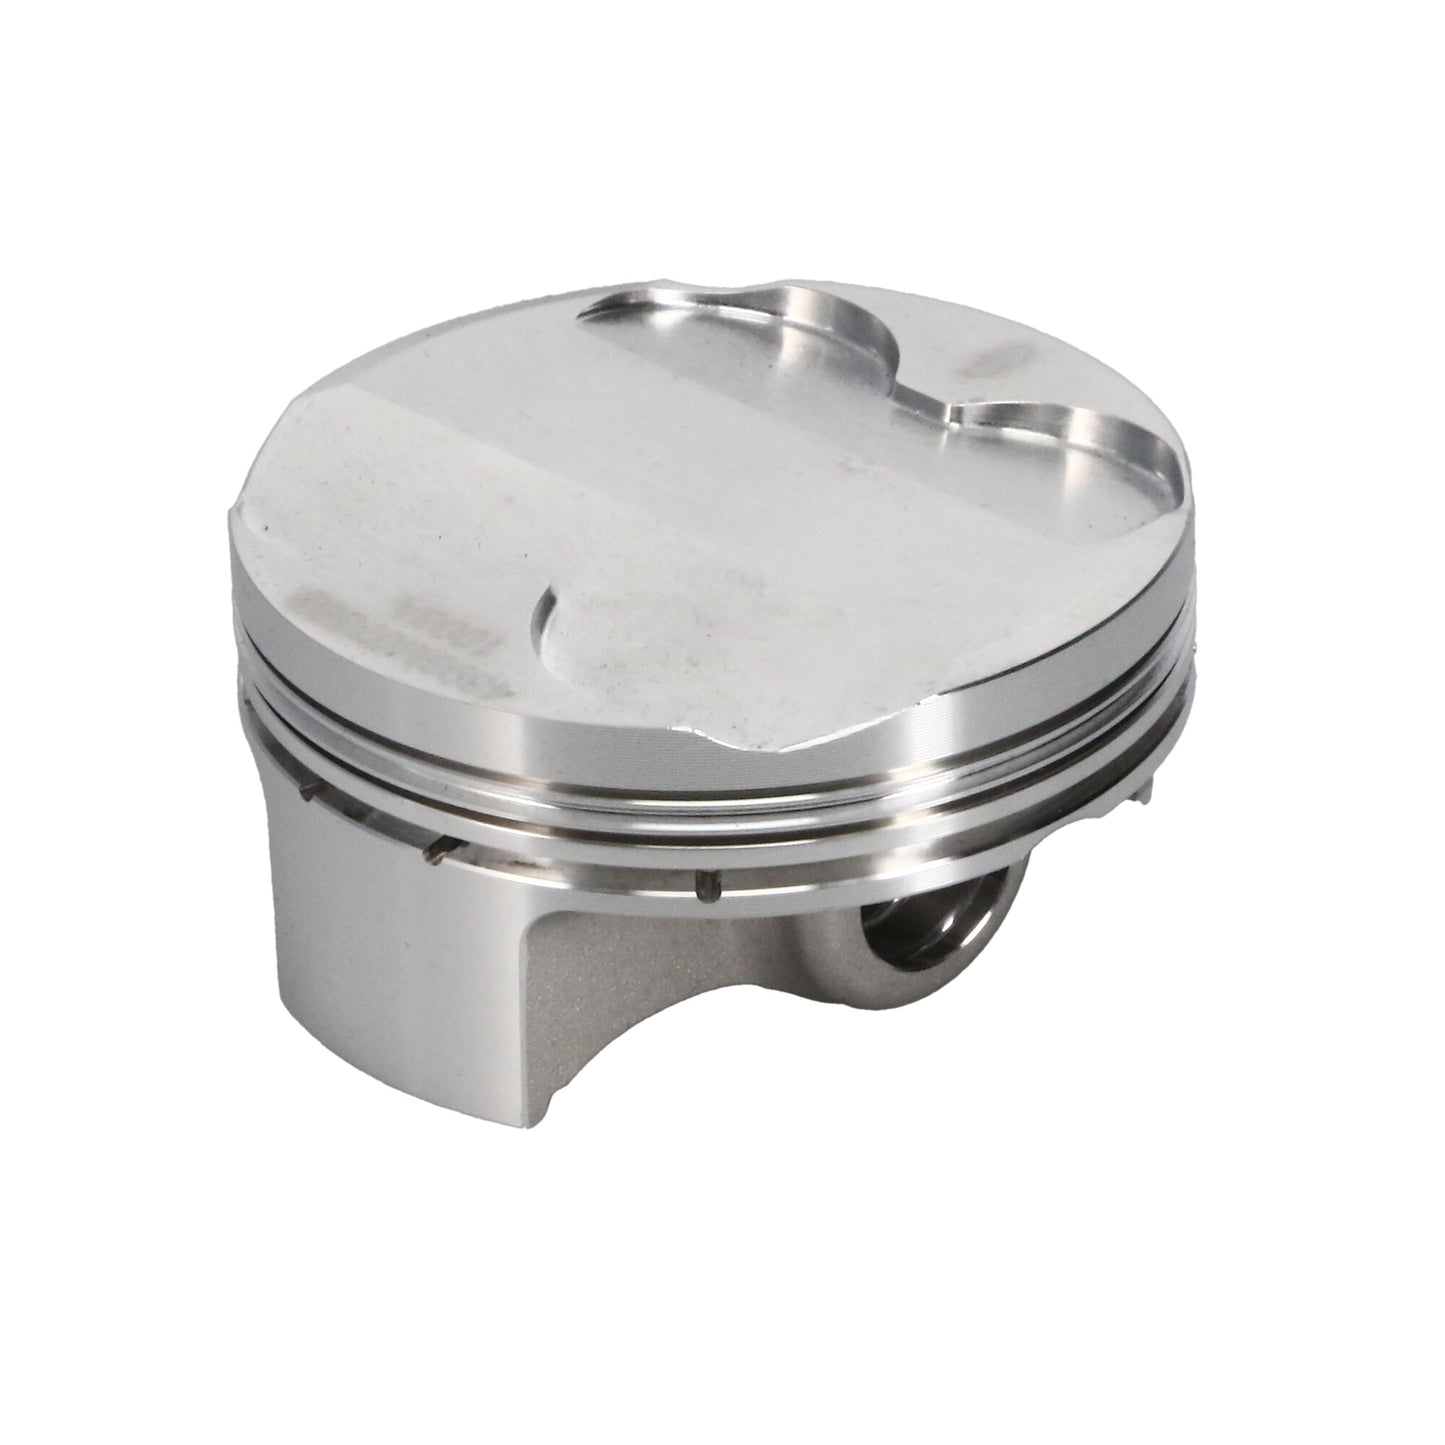 Wiseco 4 Stroke Forged Series Piston Kit 72.00 MM Bore 10.25:1 CR K1075